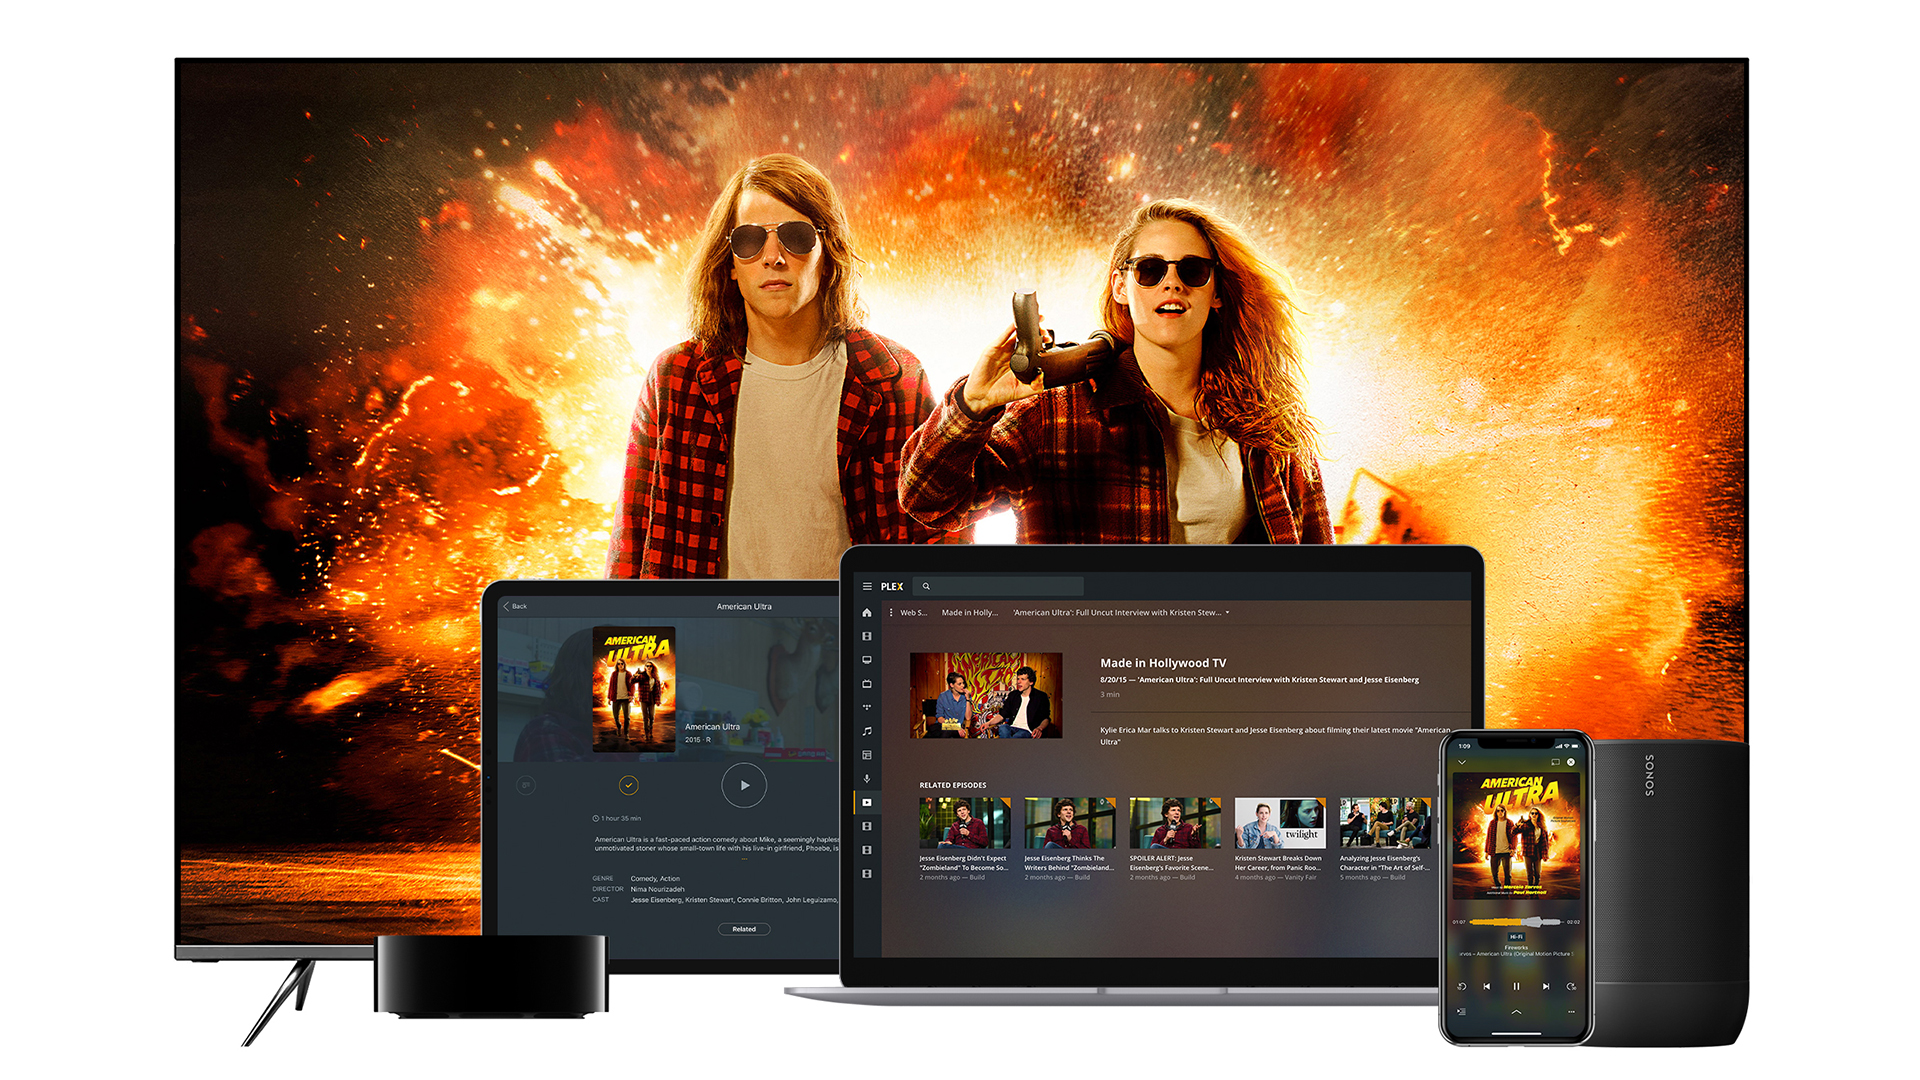 Plex video on demand is here with 1000s of free titles - Android Authority